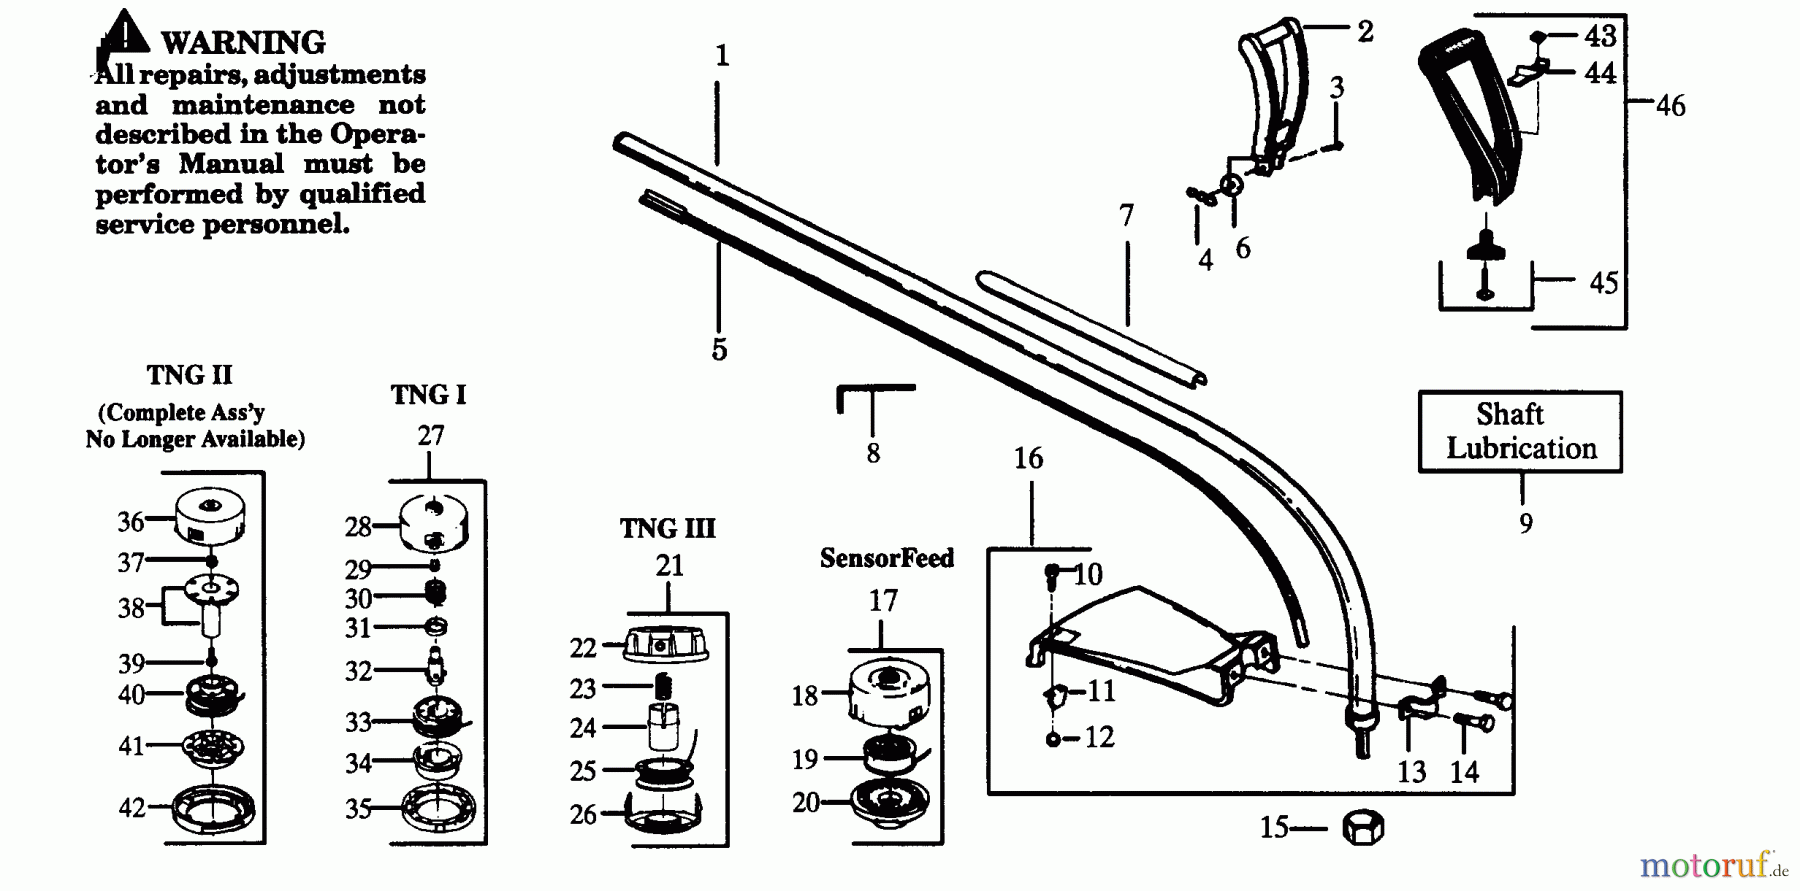  Poulan / Weed Eater Motorsensen, Trimmer GTI17T - Weed Eater String Trimmer DRIVE SHAFT & CUTTING HEAD